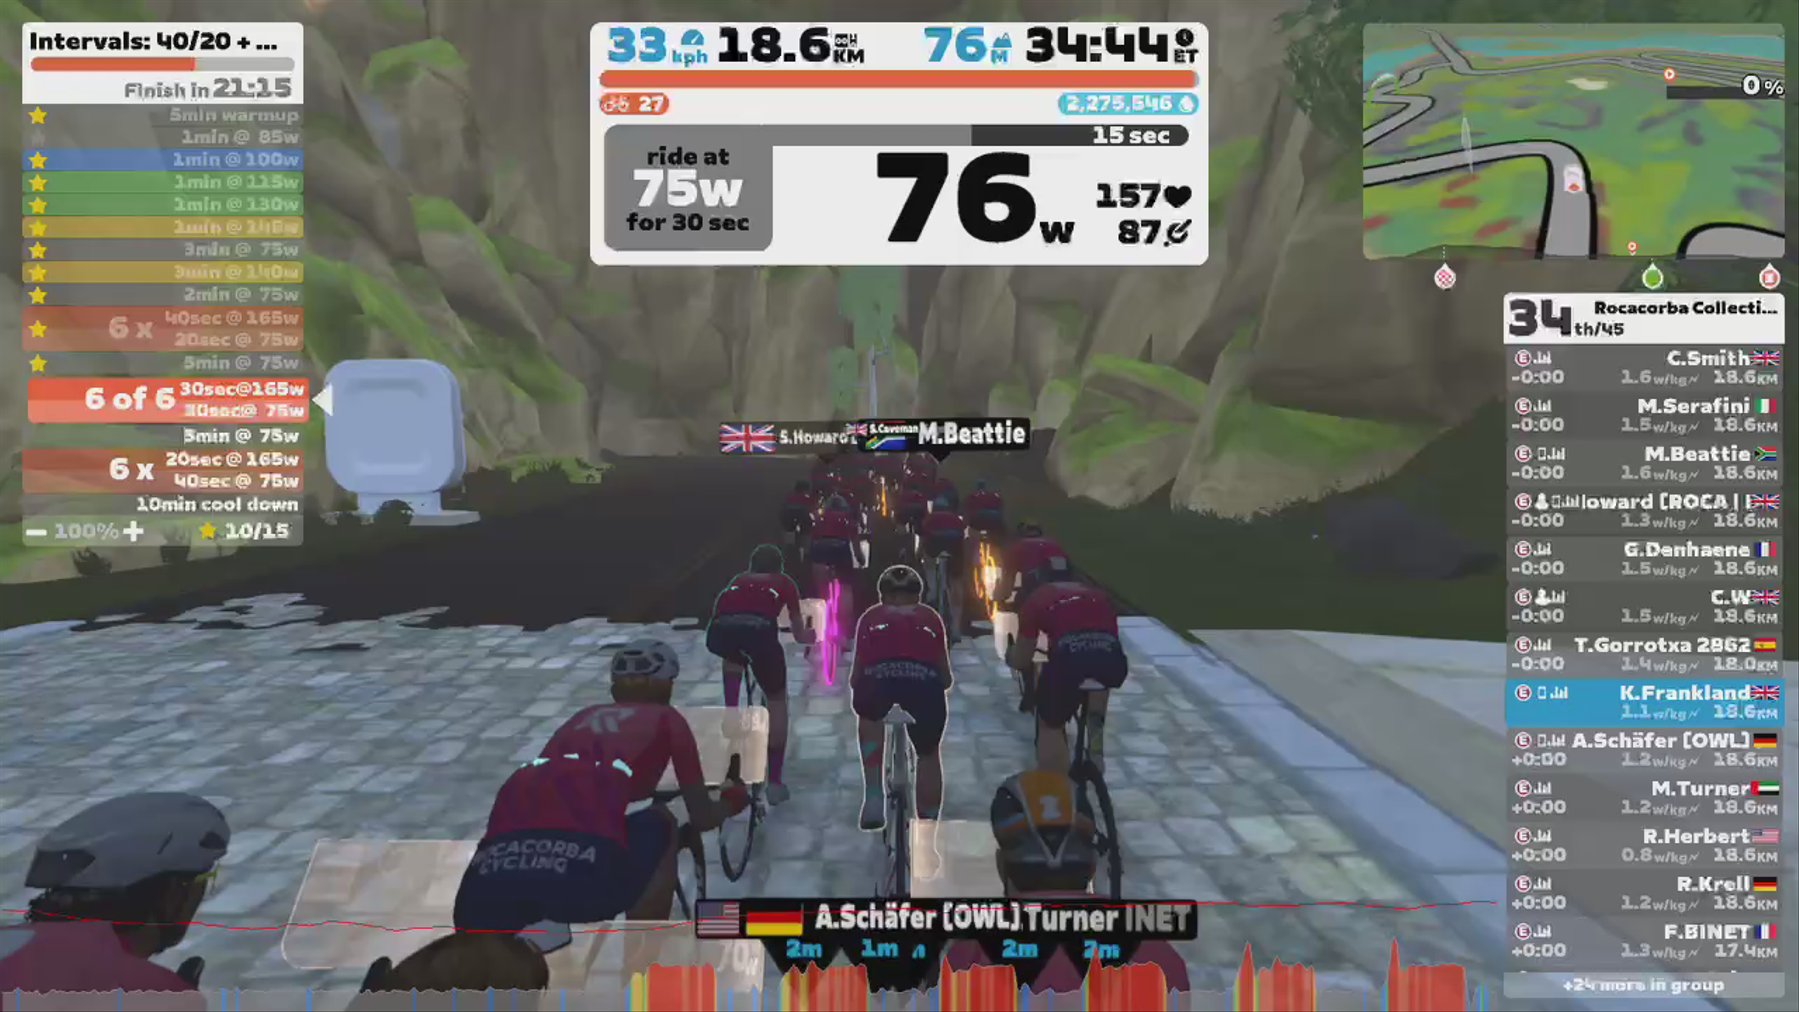 Zwift - Group Workout: Rocacorba Collective Workout Session (E) on Beach Island Loop in Watopia